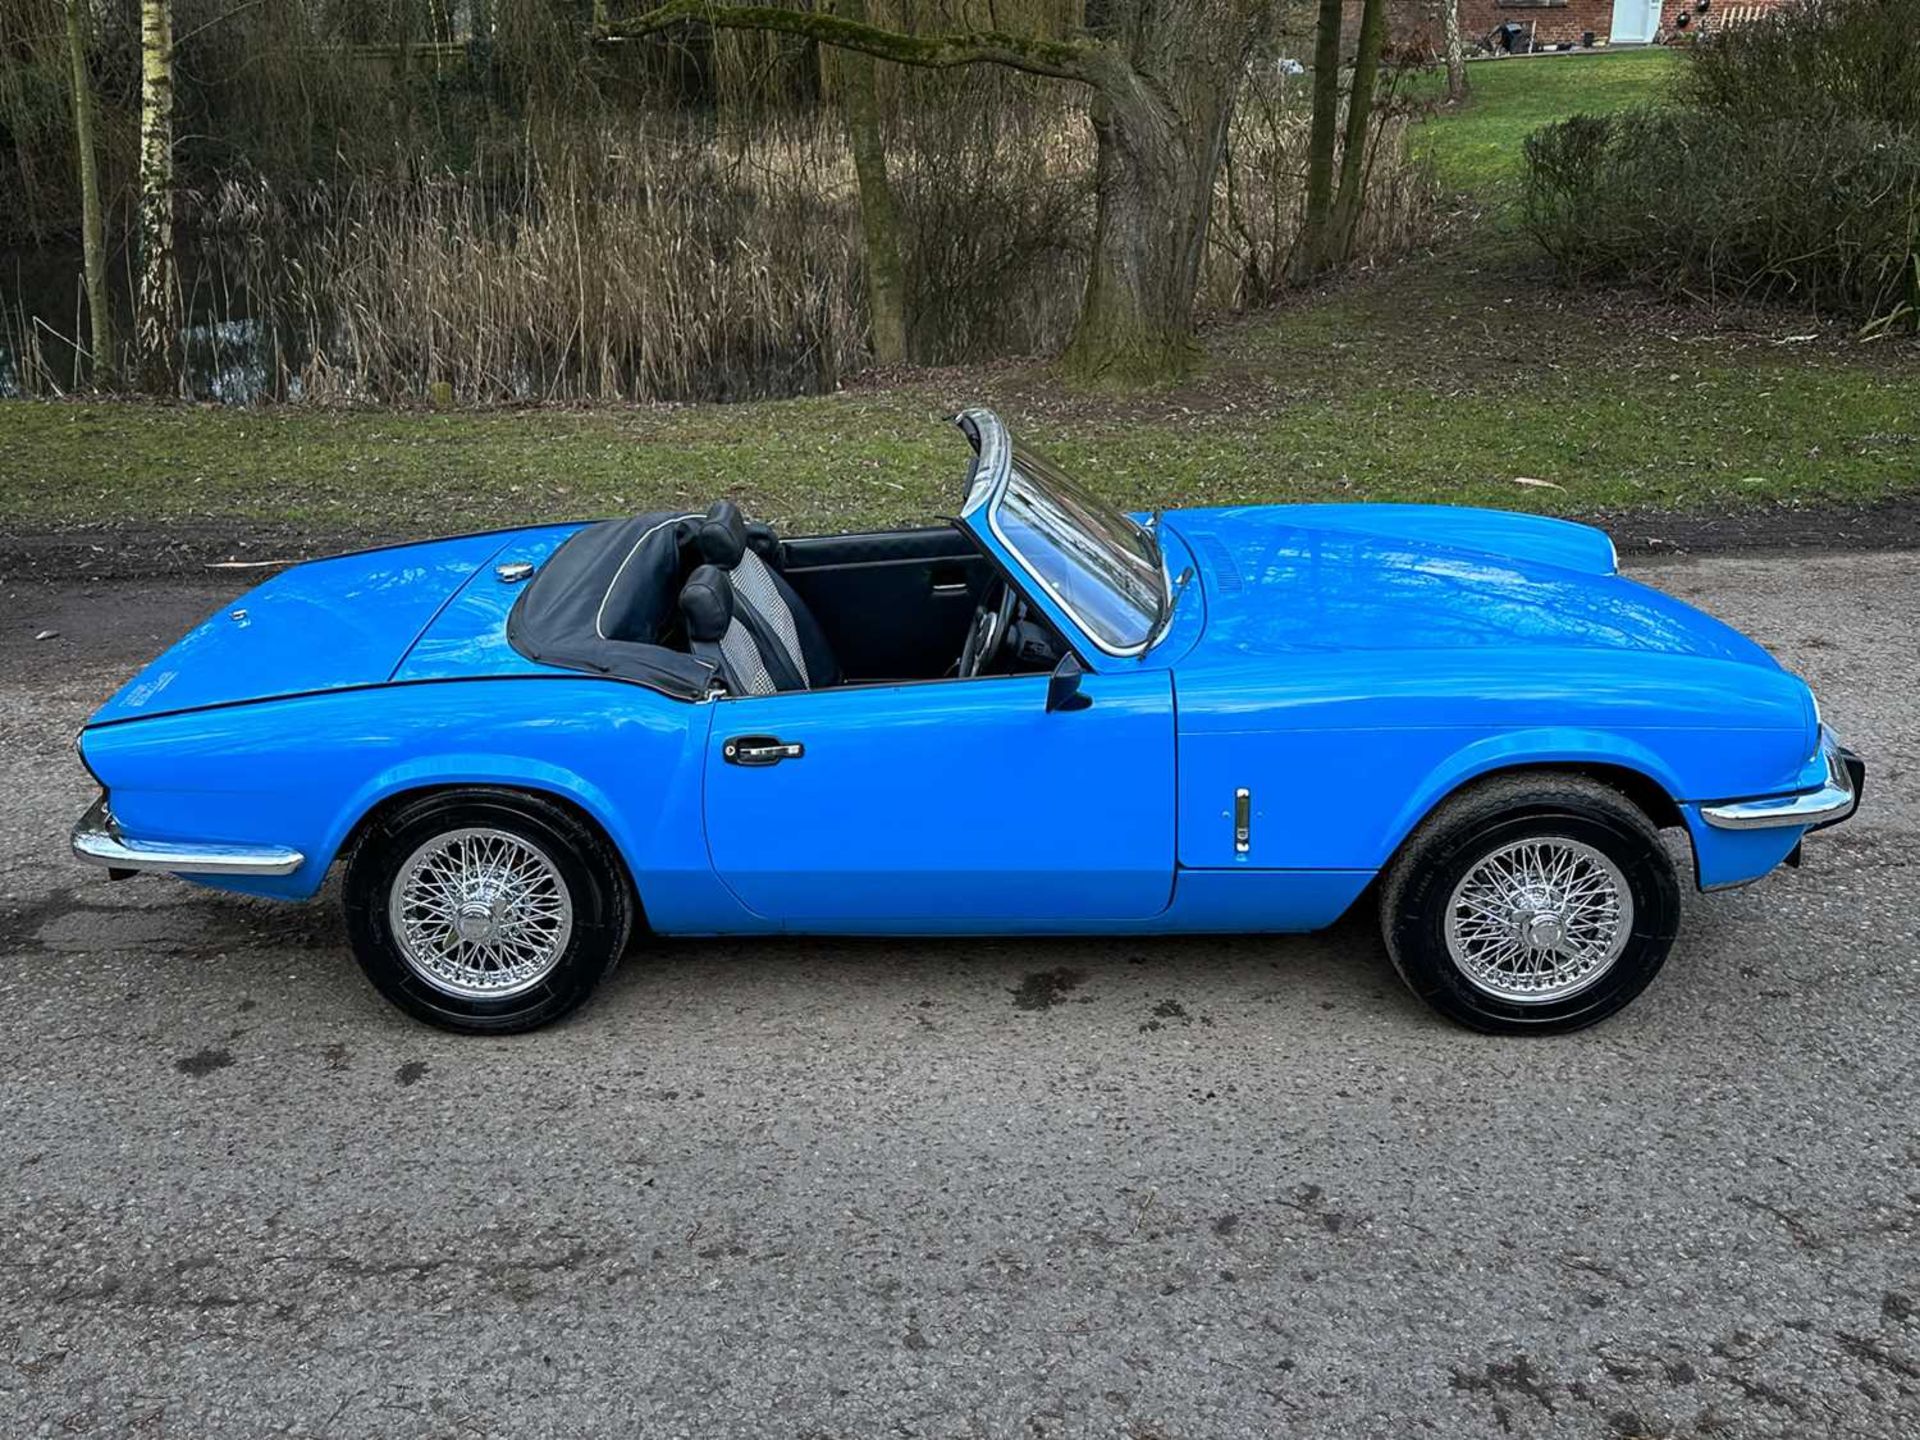 1981 Triumph Spitfire 1500 Comes with original bill of sale - Image 9 of 96